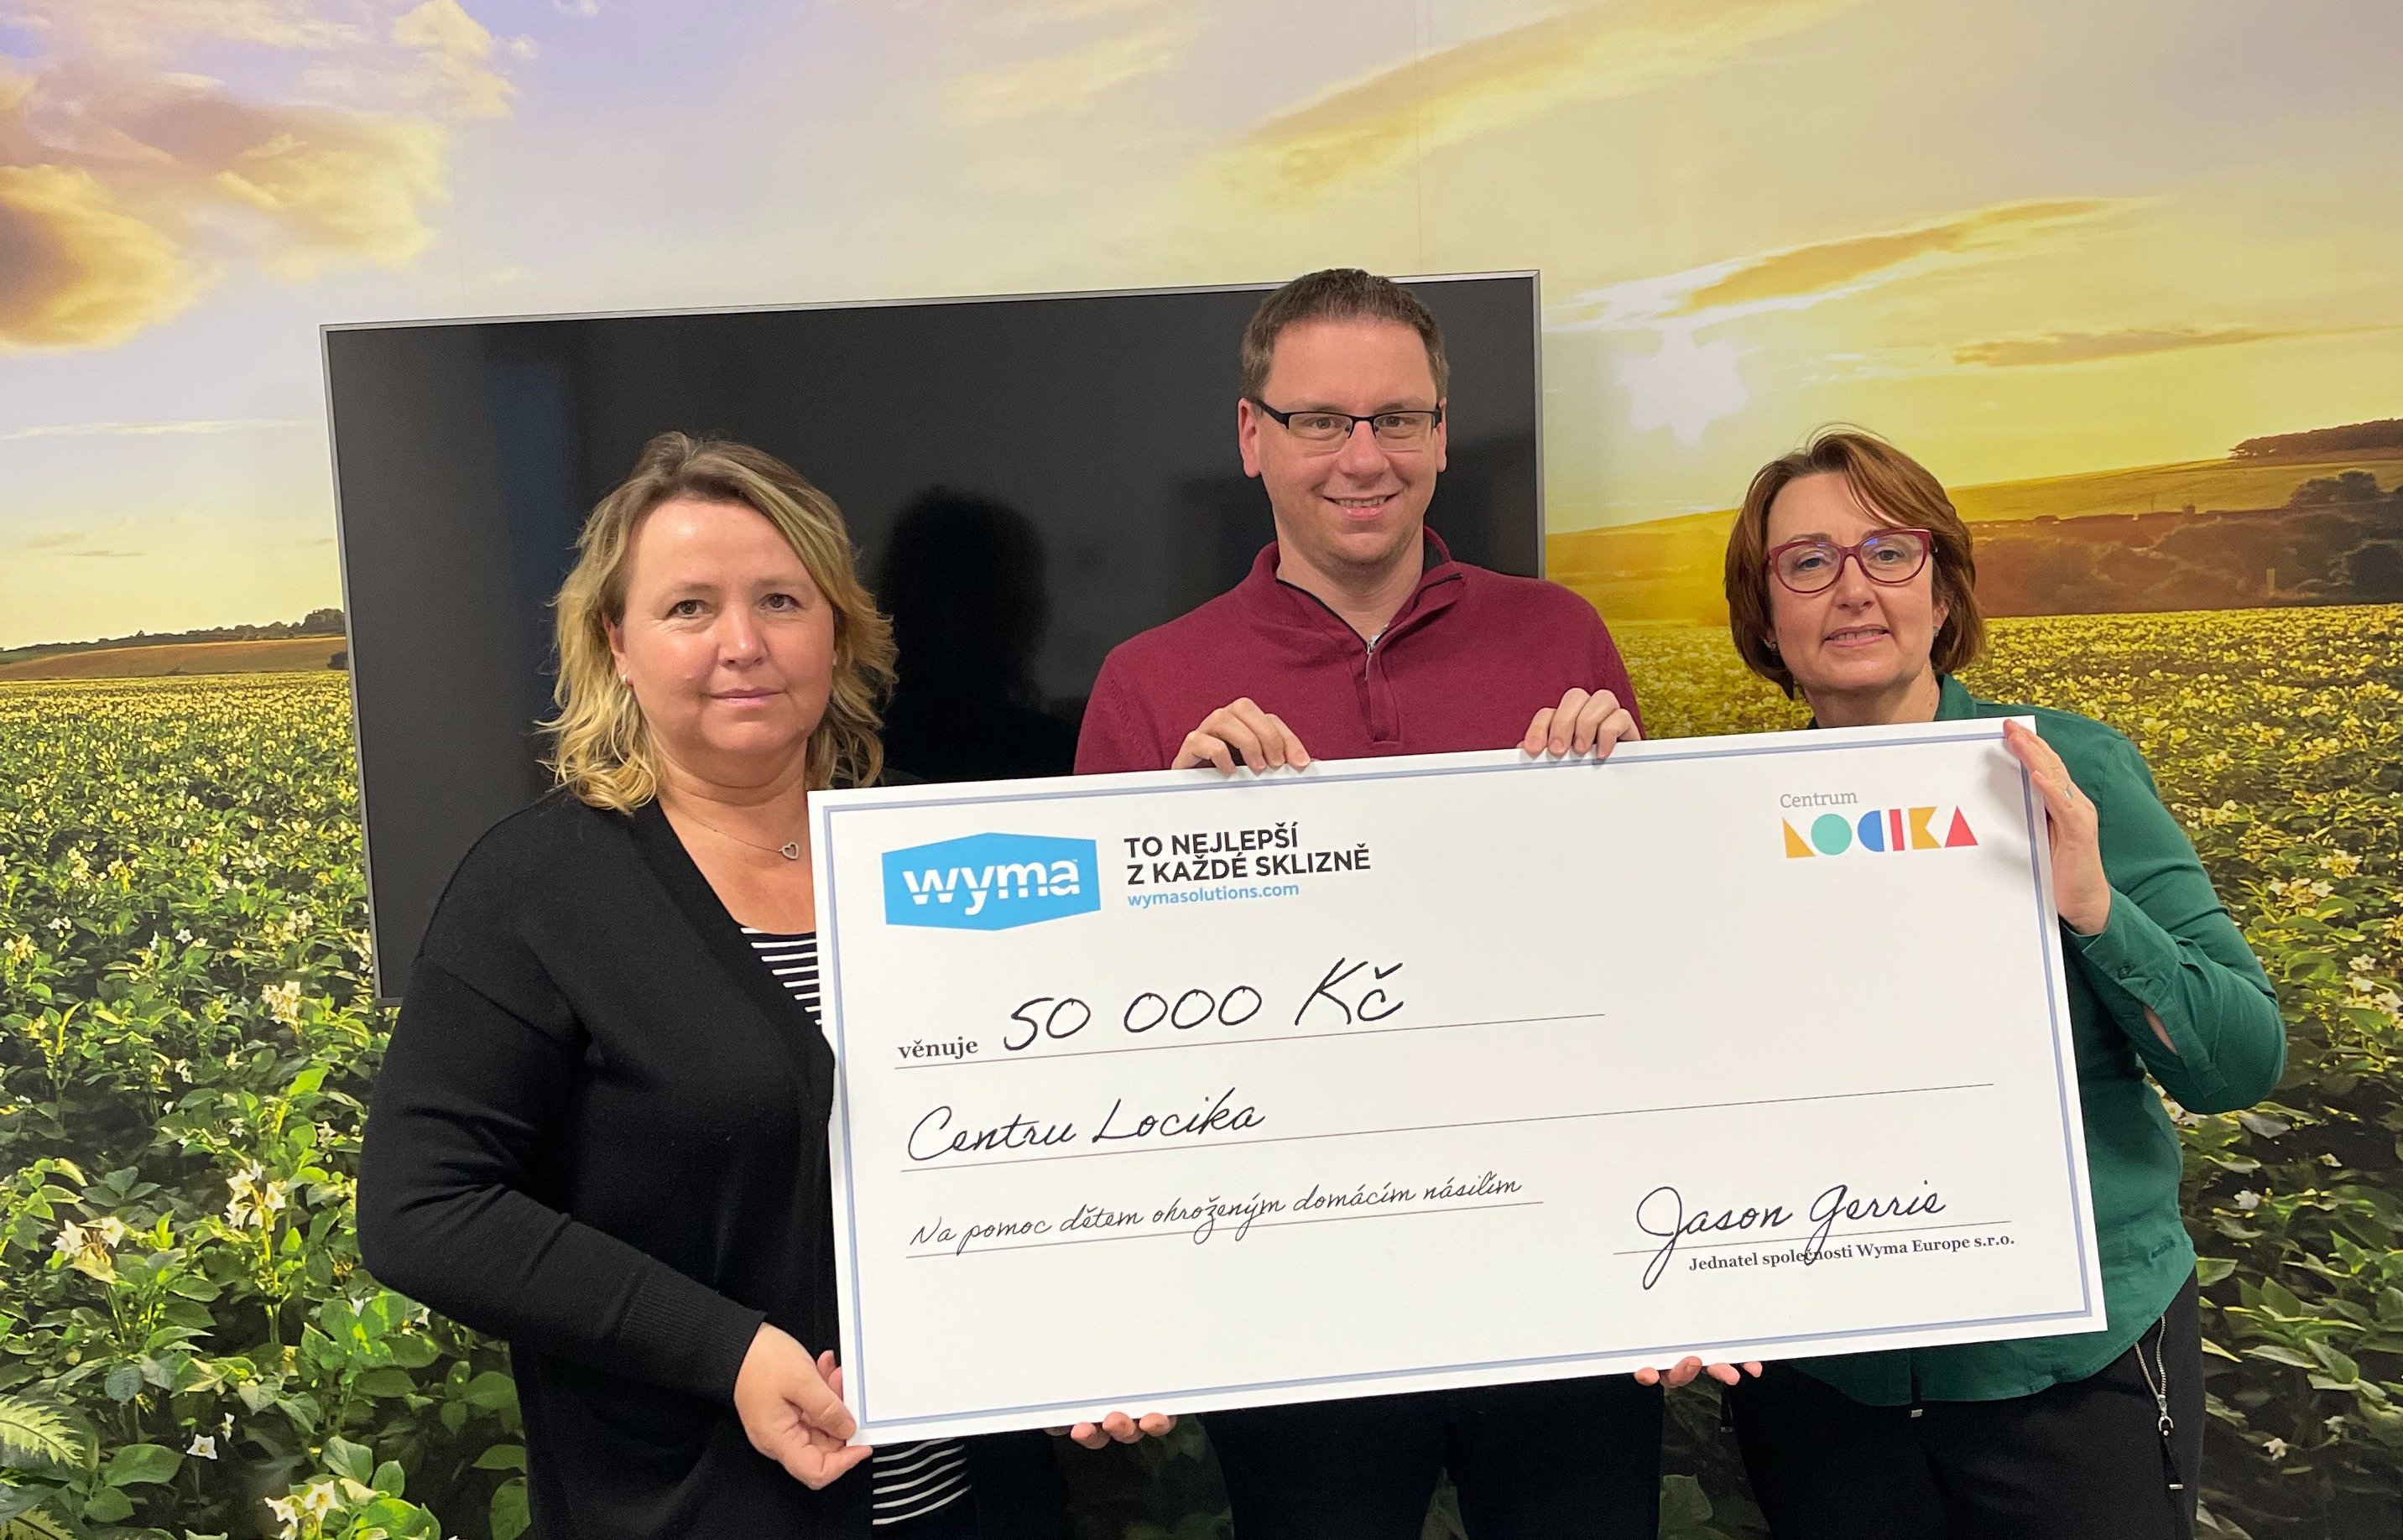 Wyma Europe Again Donates to Local Children’s Charity for Christmas